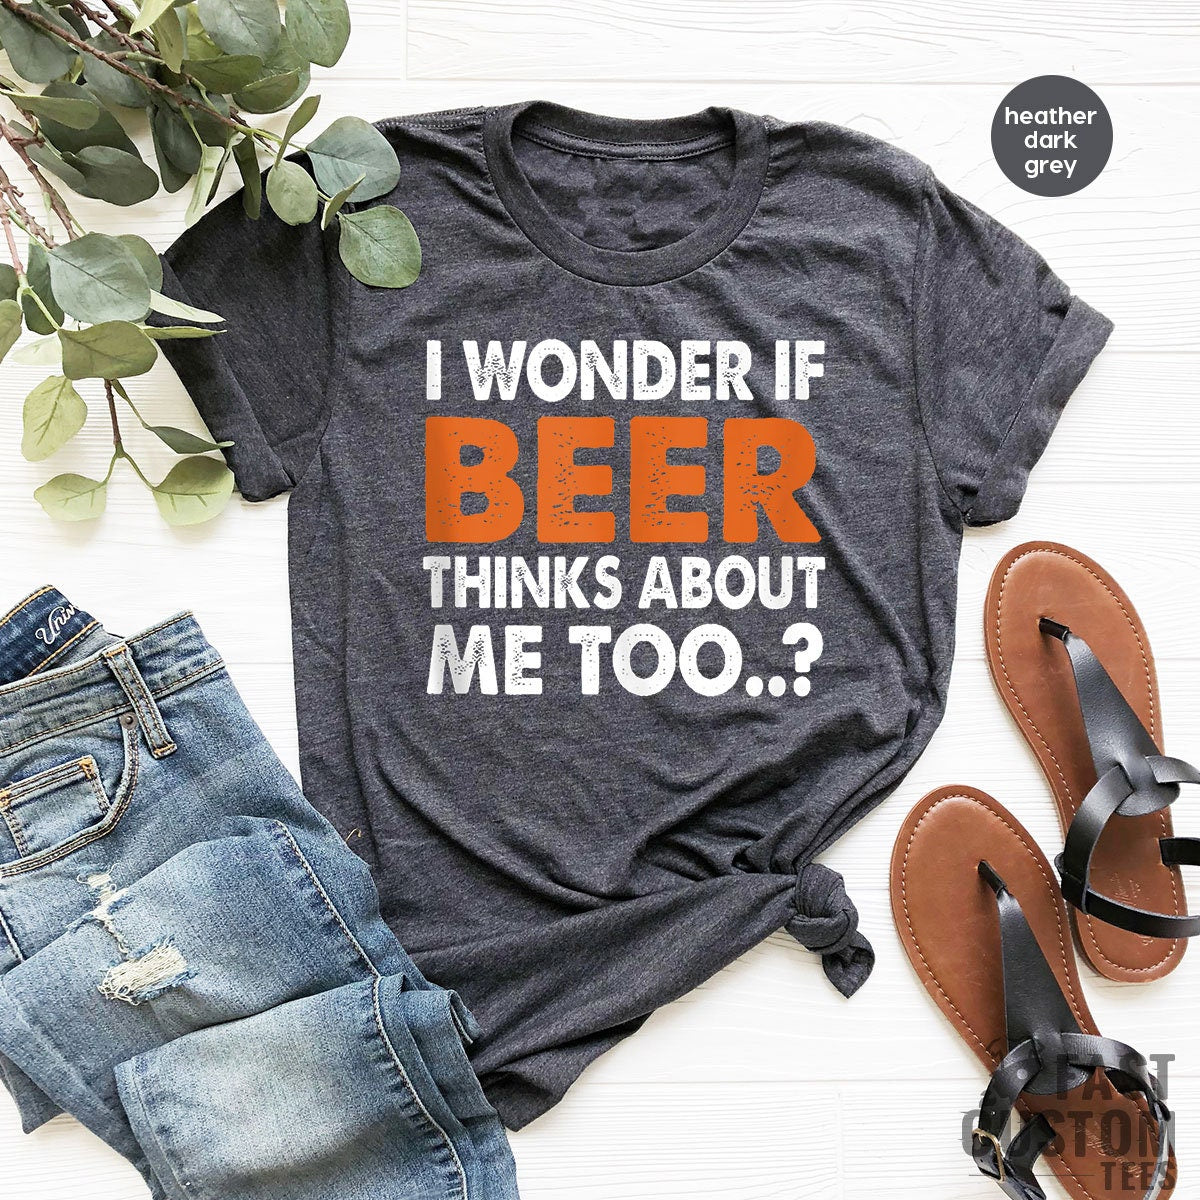 Funny Beer Shirt, I Wonder If Beer Thinks About Me Too, Day Drinking Shirts, Beer Quotes Tee, St Patricks Day Shirt, Funny Drinking Shirts - Fastdeliverytees.com